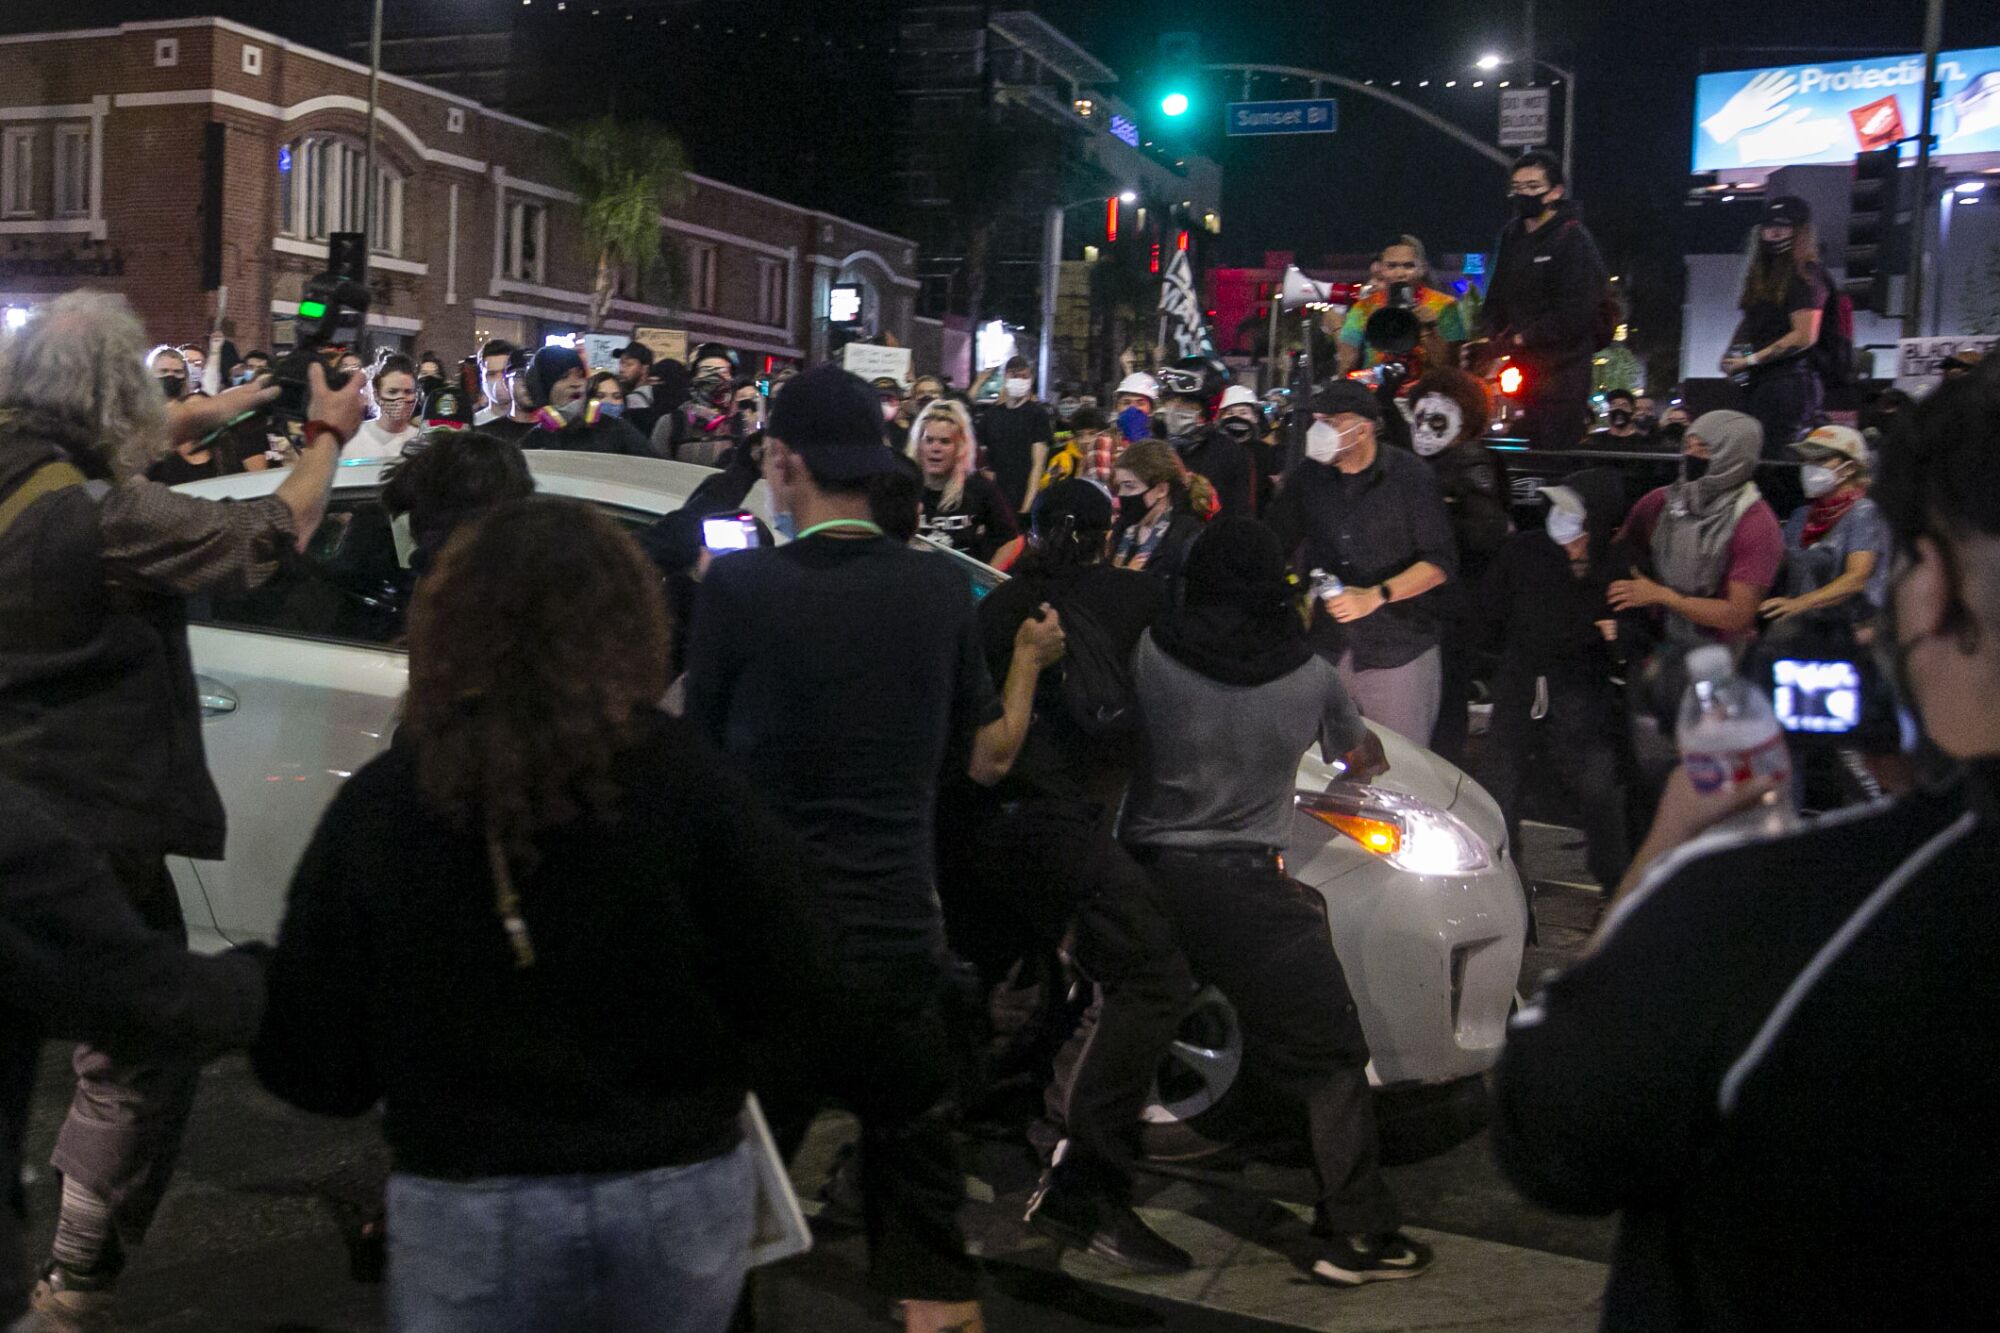 A Prius runs through a crowd of people on Sunset Boulevard during a protest held for Breonna Taylor in Hollywood